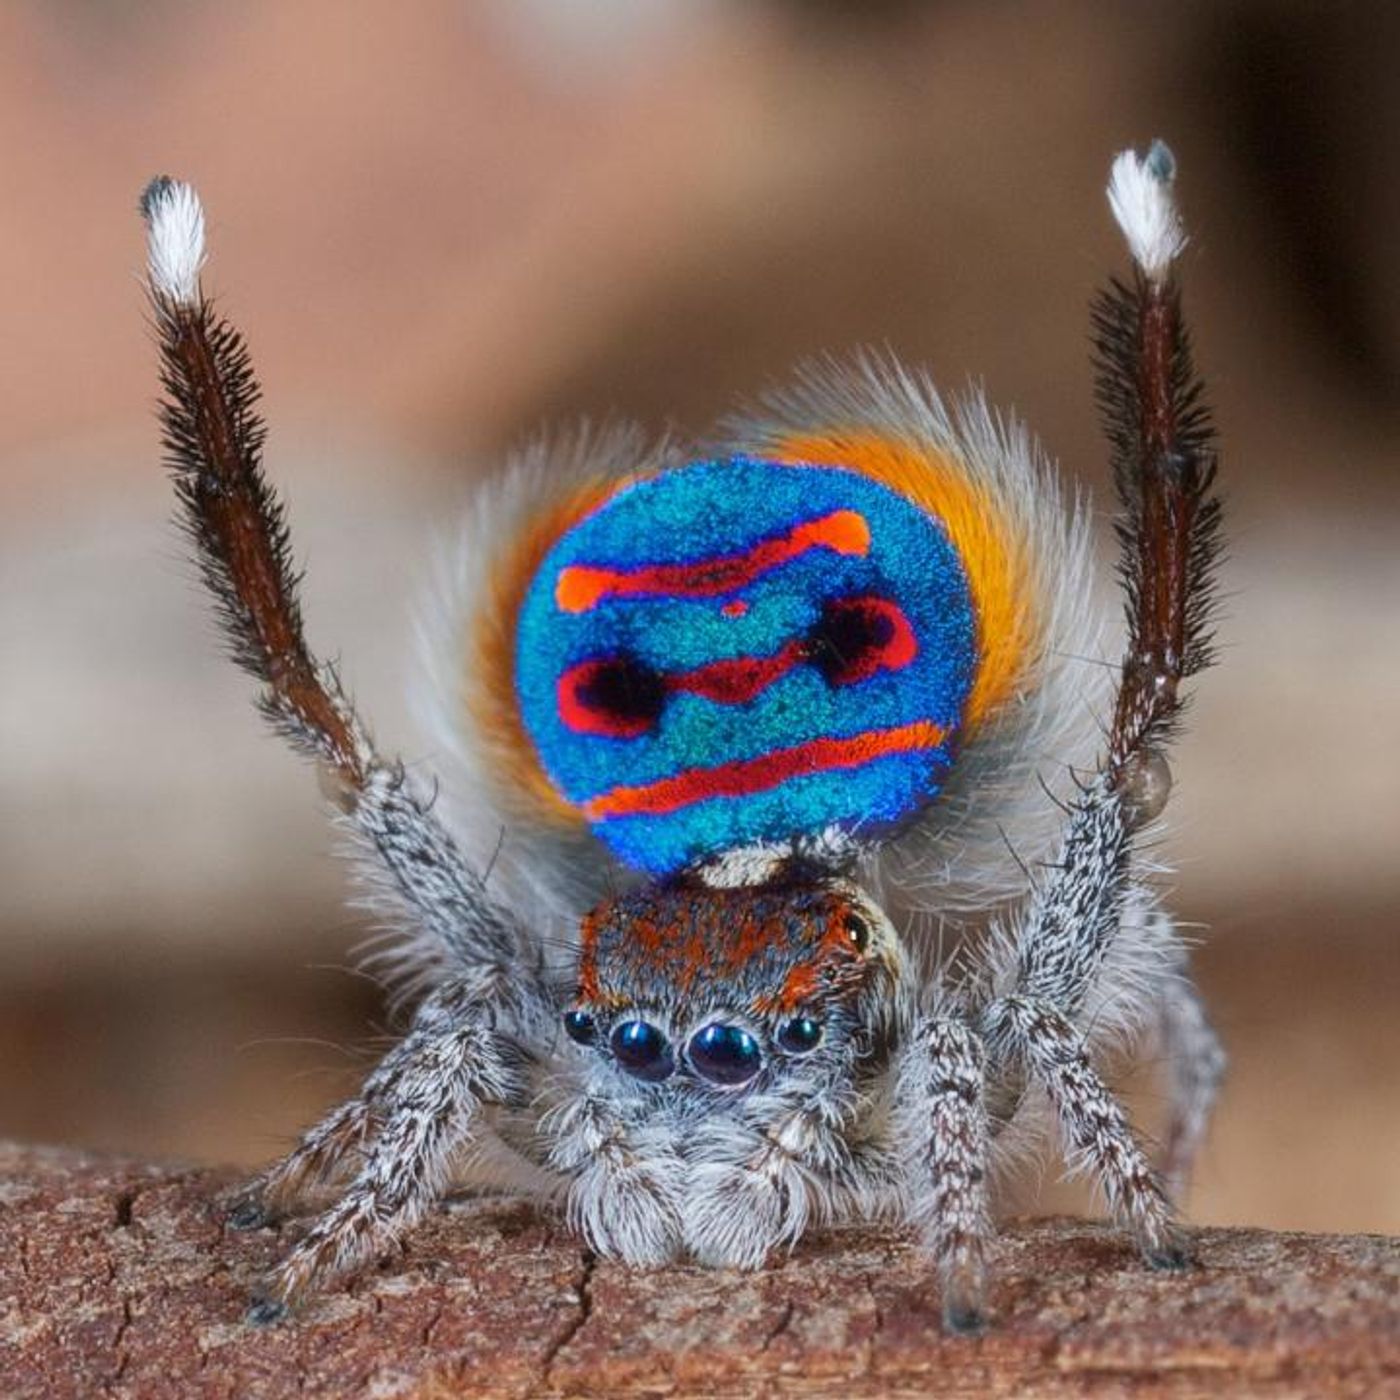 A male Maratus speciosus 'peacock' jumping spider flashes his colorful abdomen flap in preparation for his rhythmic mating dance ritual. / Credit: Jurgen Otto